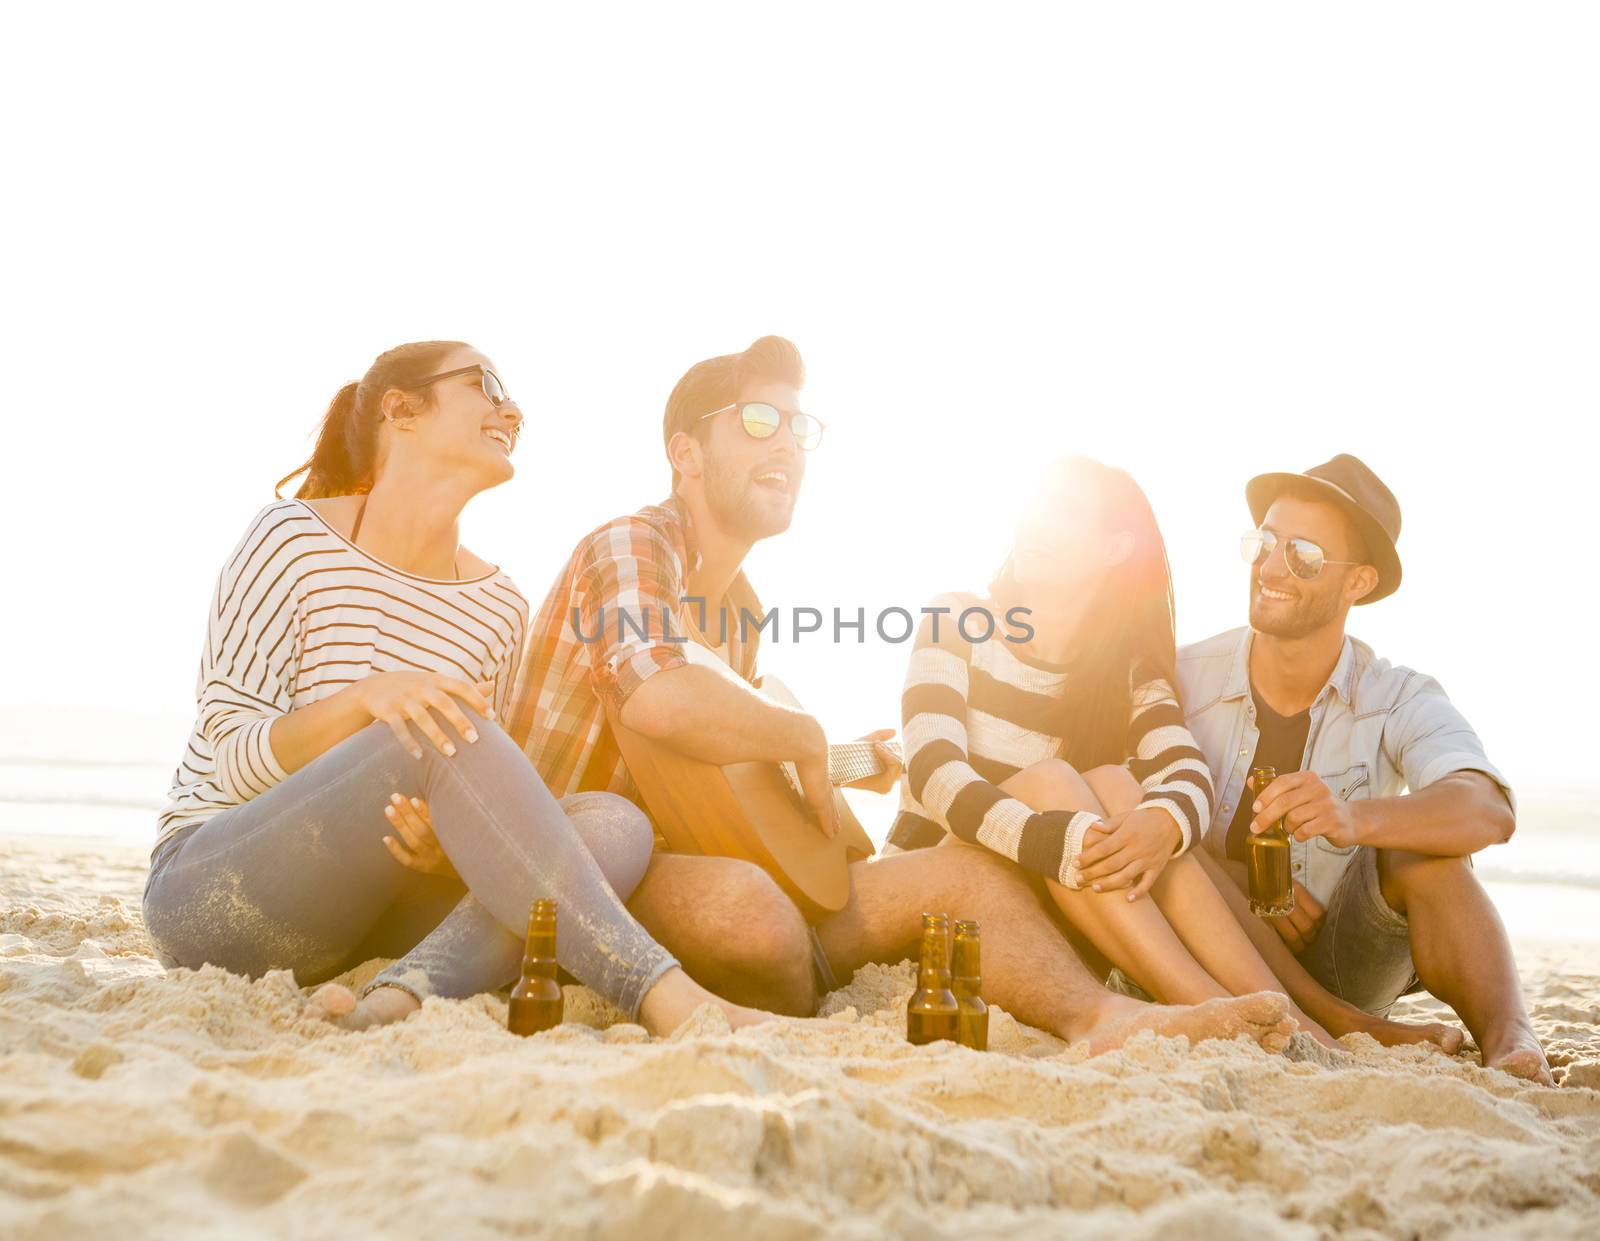 The best summer is with friends by Iko